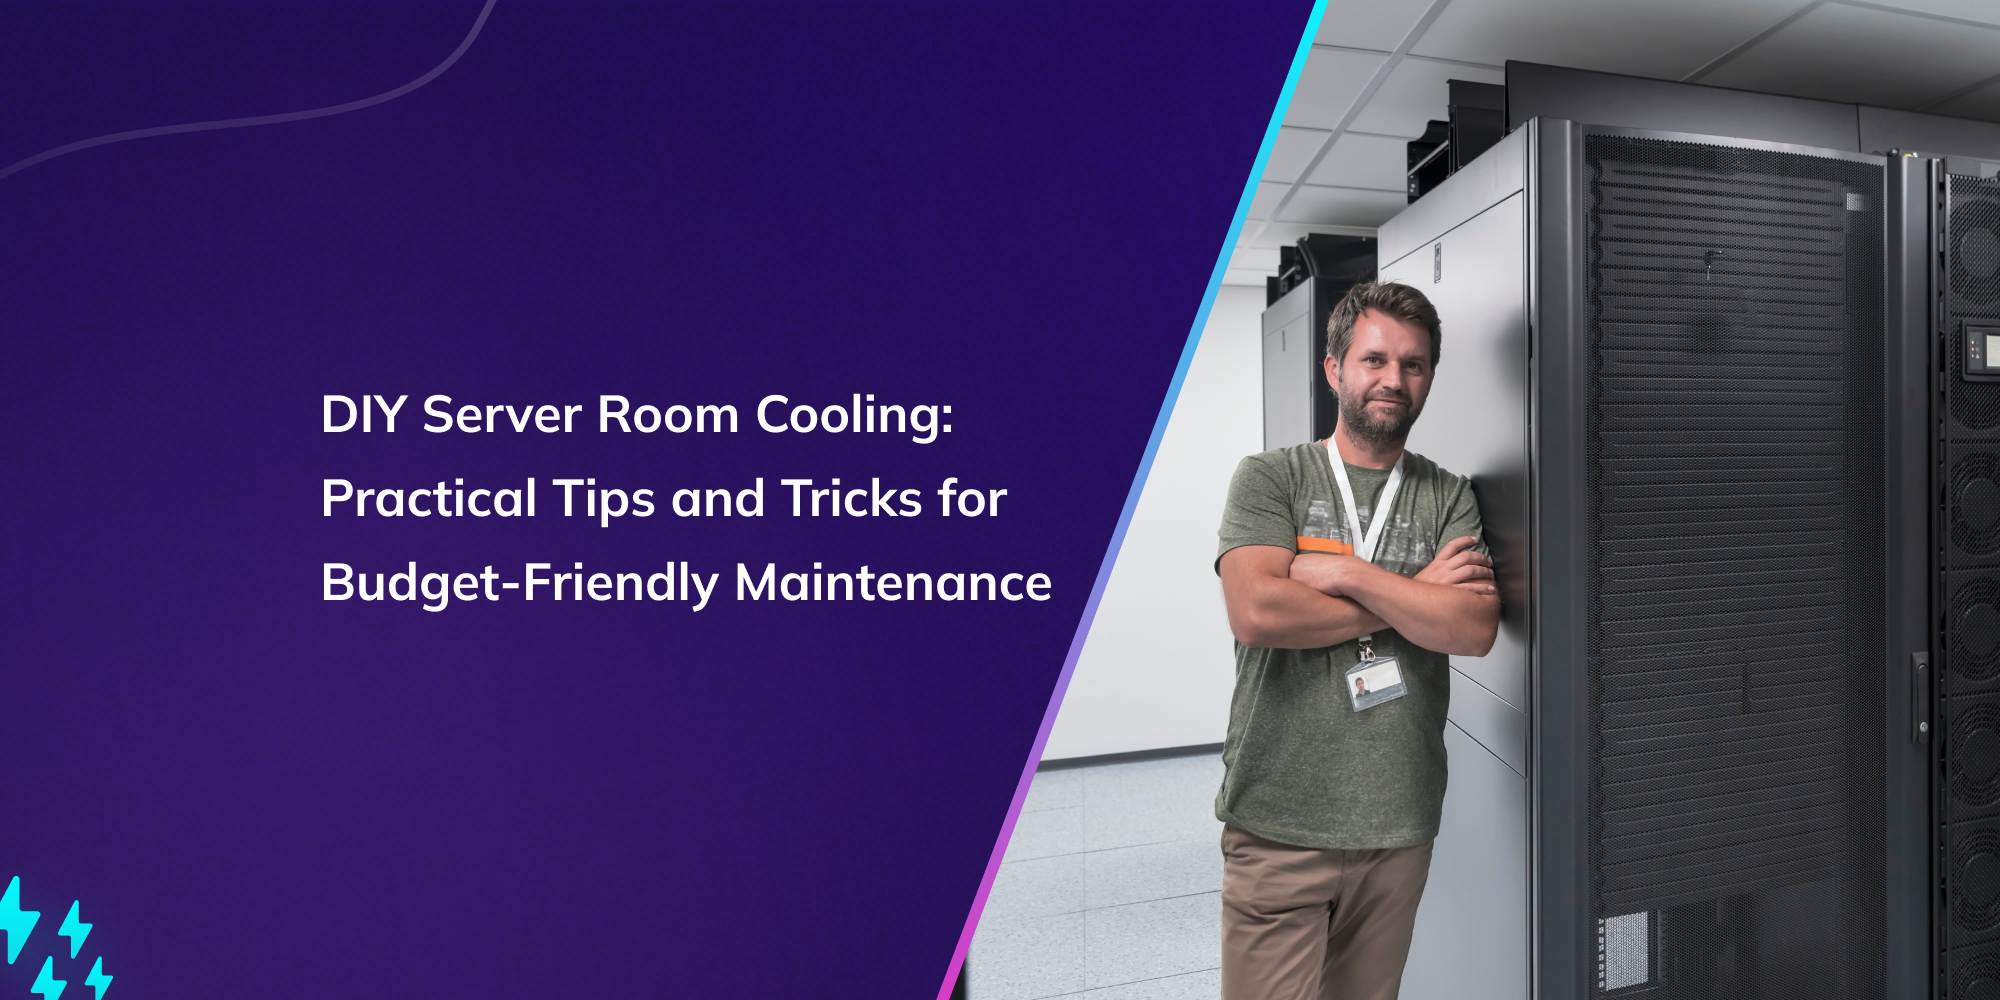 DIY Server Room Cooling: Practical Tips and Tricks for Budget-Friendly Maintenance